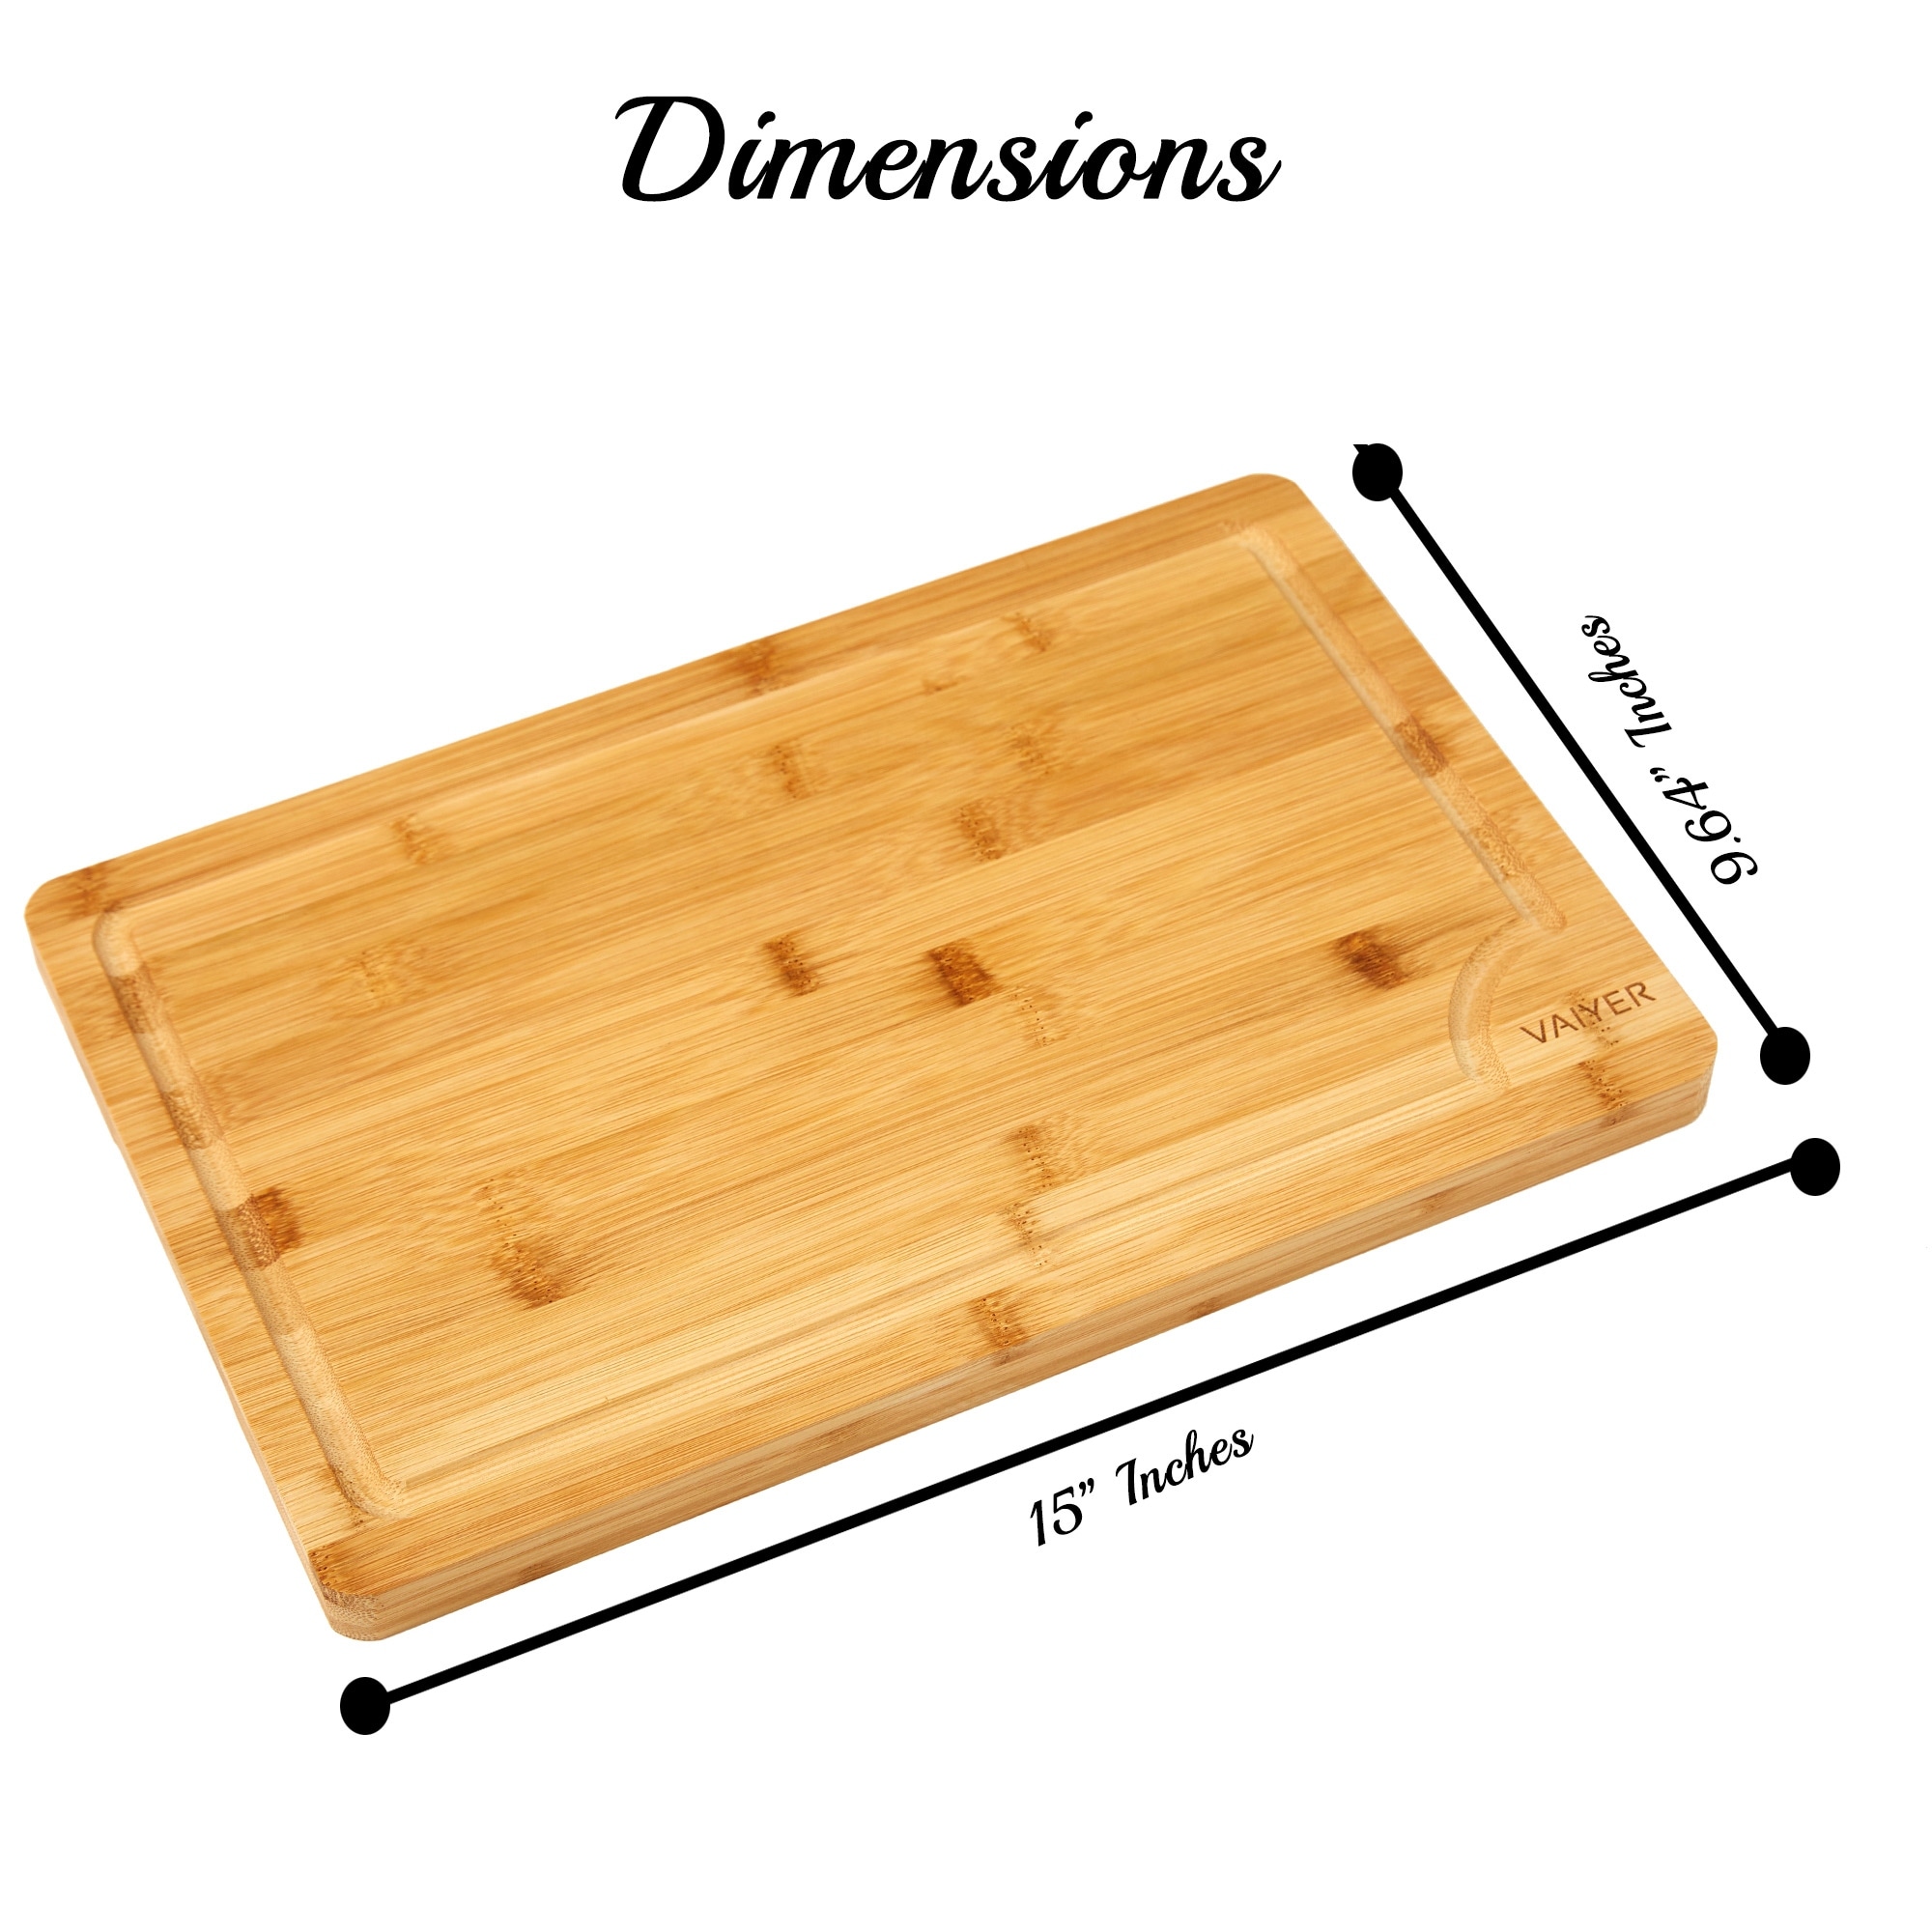 Heim Concept Organic Bamboo Cutting Board and Serving Tray with Drip Groove